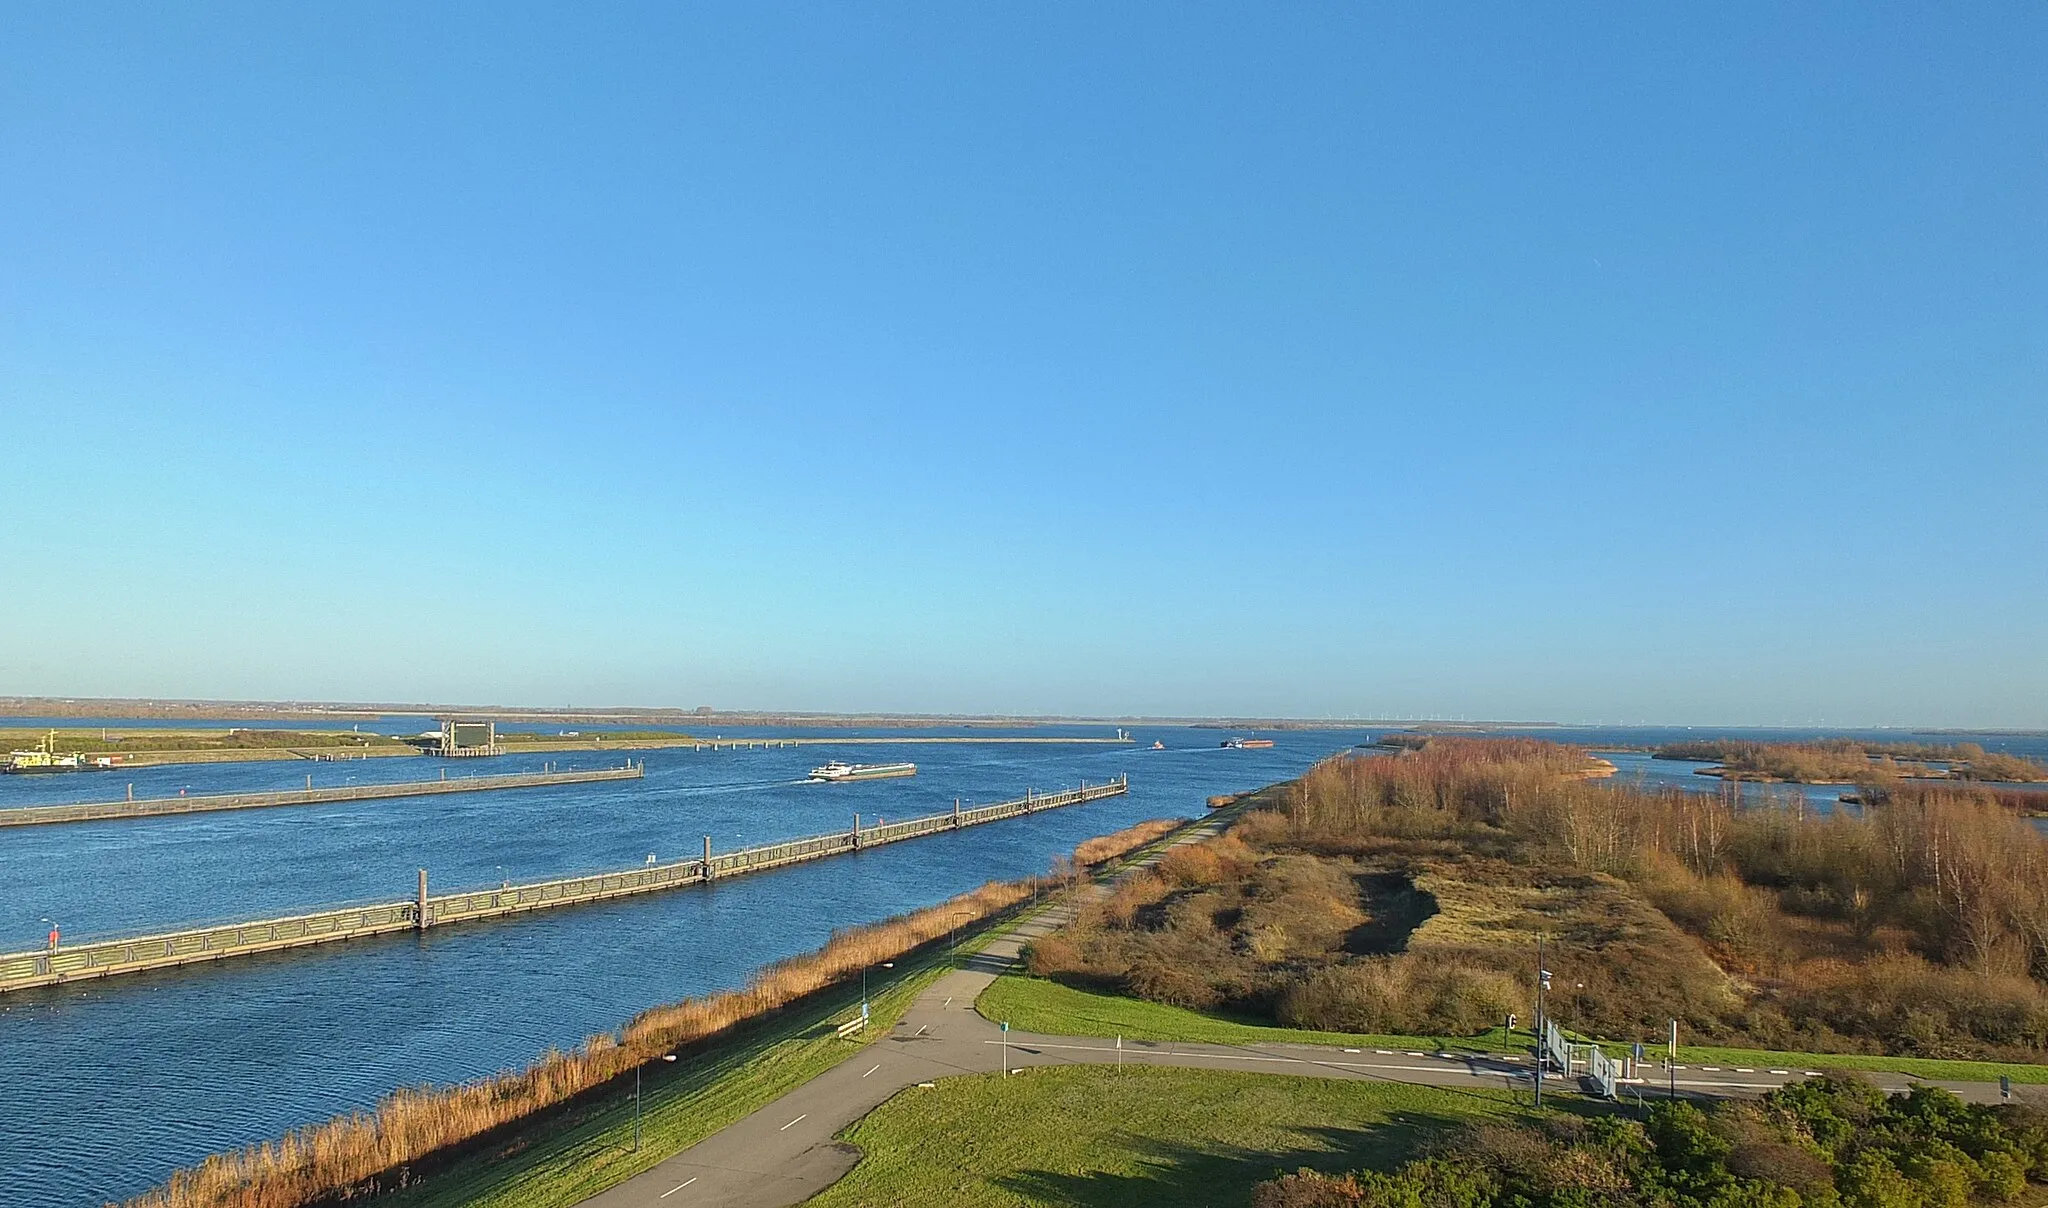 Photo showing: The Karmmer locks complex in the Philips dam, which is the shipping connection between the Oosterschelde and Volkerak-Zoommeer. The locks are technically sophisticated because they must avoid the exchange between the freshwater Volkerak and the brackish water of the Oosterschelde. The locks are designed so that there is no influx of saltwater that enters the Volkerak and only a little fresh water in the Oosterschelde.